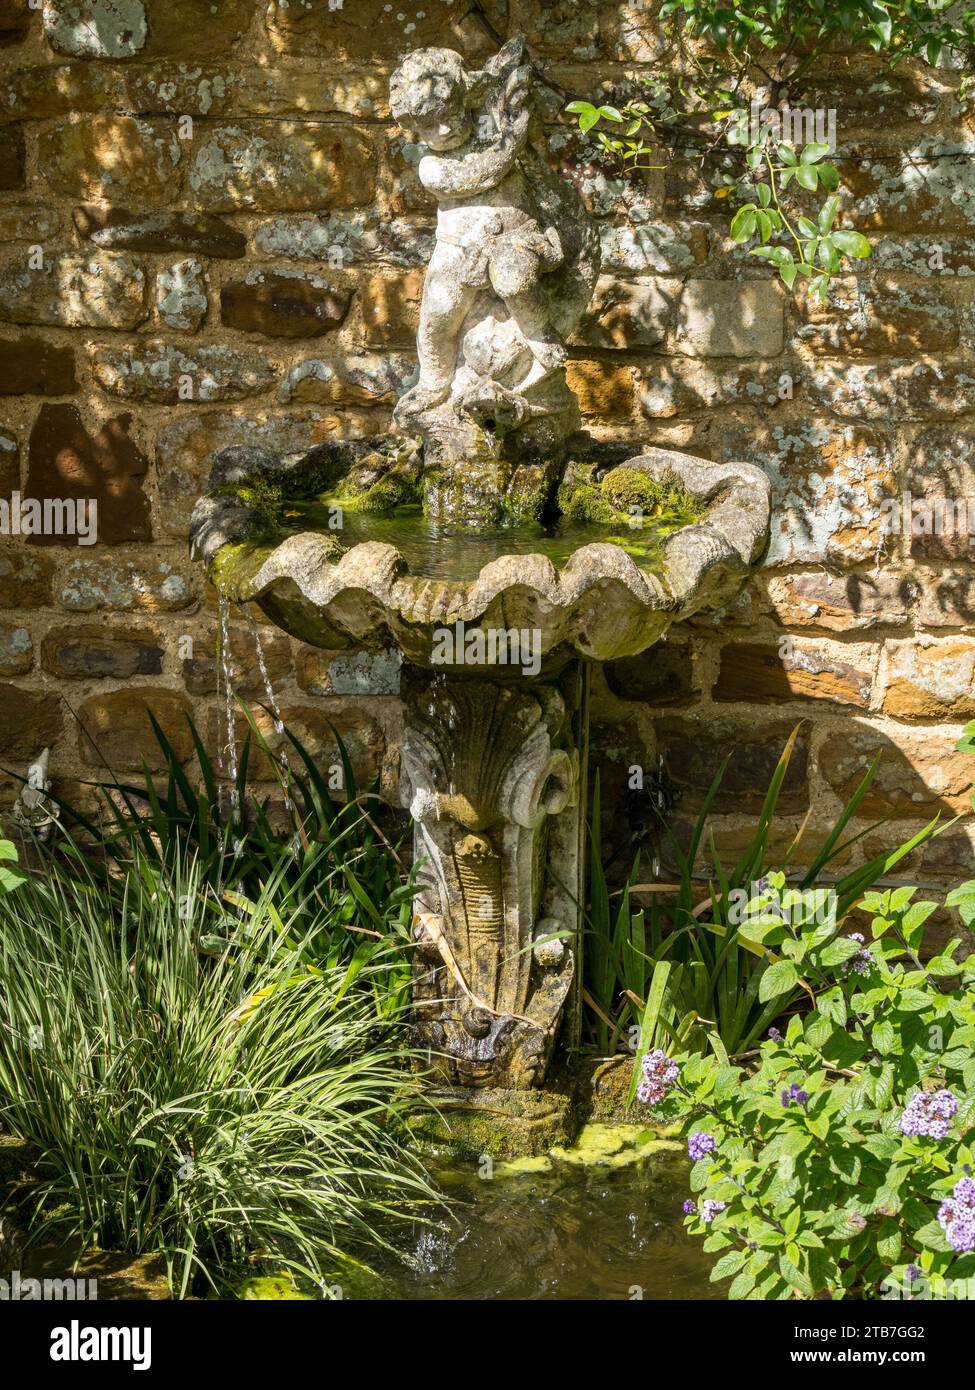 Small wall mounted garden water feature / bird bath with cherub above clam shell in carved stone. Coton Manor Gardens, Northamptonshire, England, UK Stock Photo